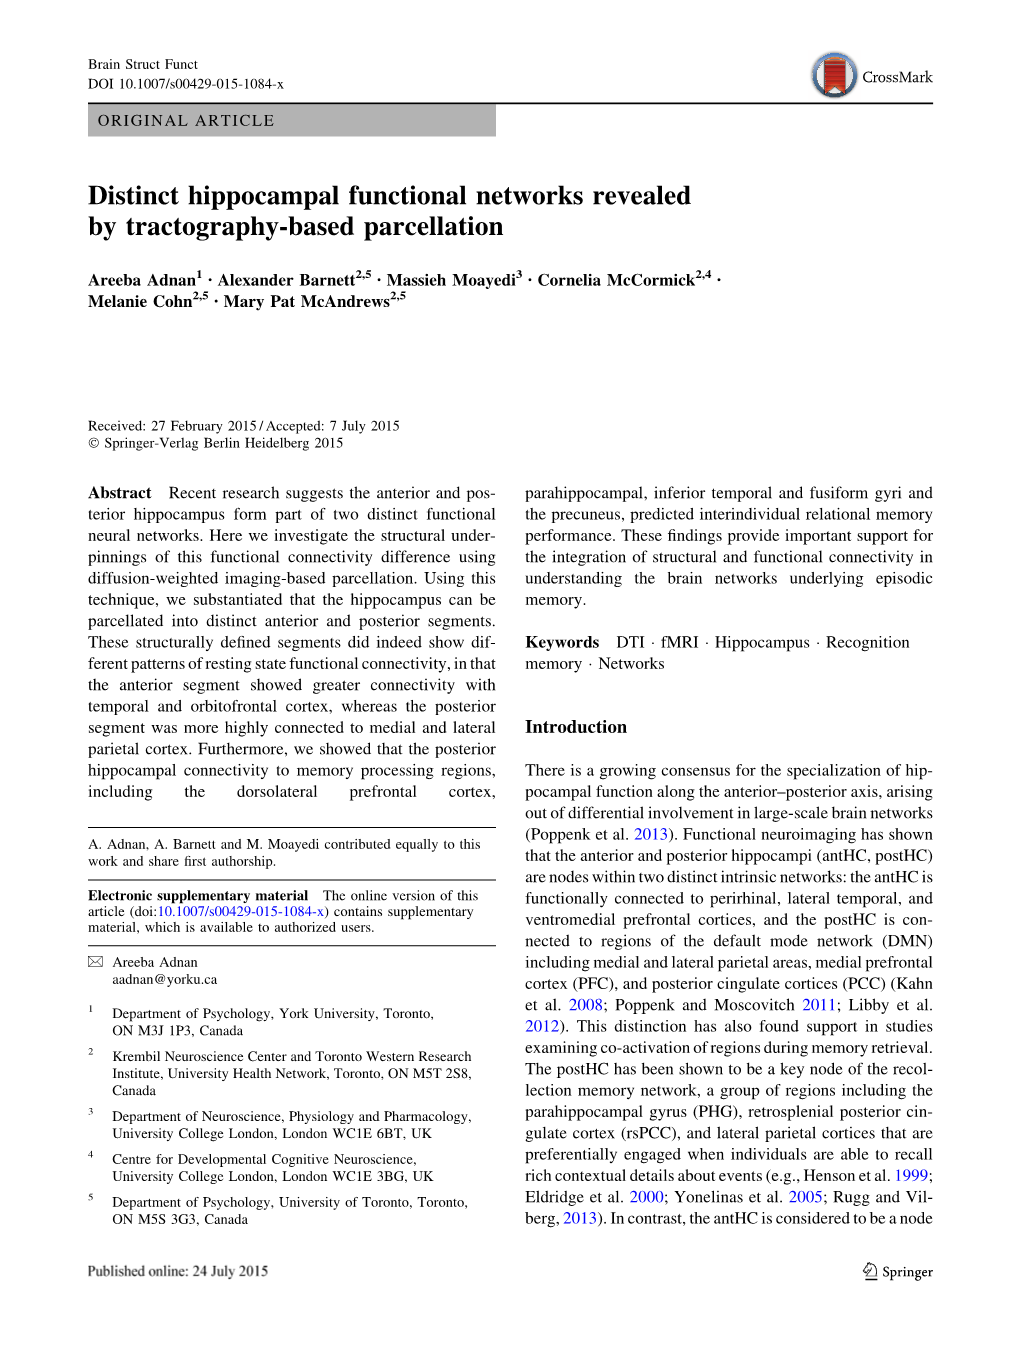 Distinct Hippocampal Functional Networks Revealed by Tractography-Based Parcellation